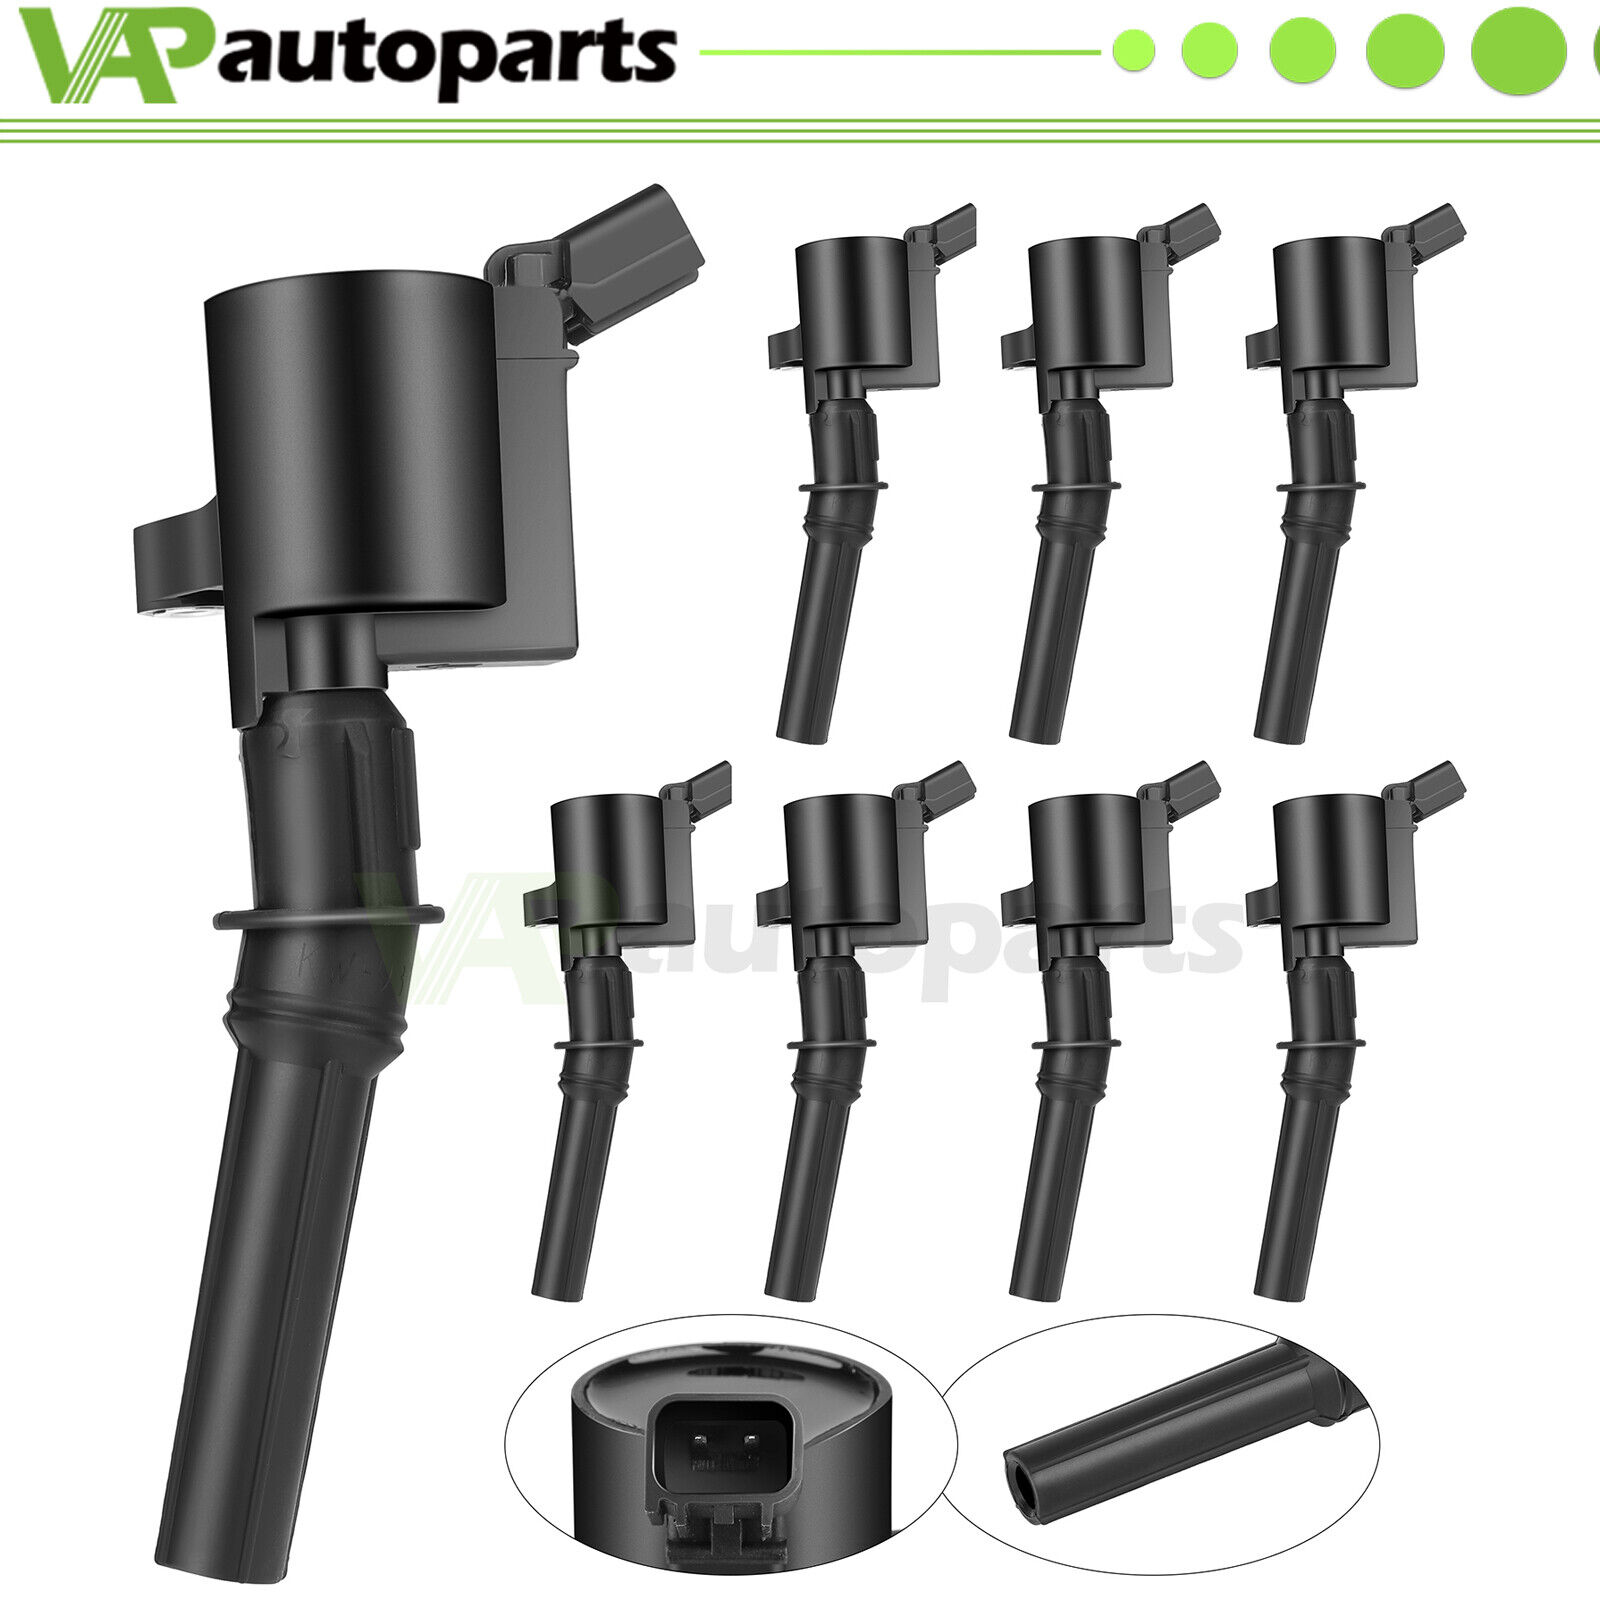 8 DG508 Ignition Coil Pack For Ford F150 Expedition 00 01 02 2003 2004 4.6/5.4L